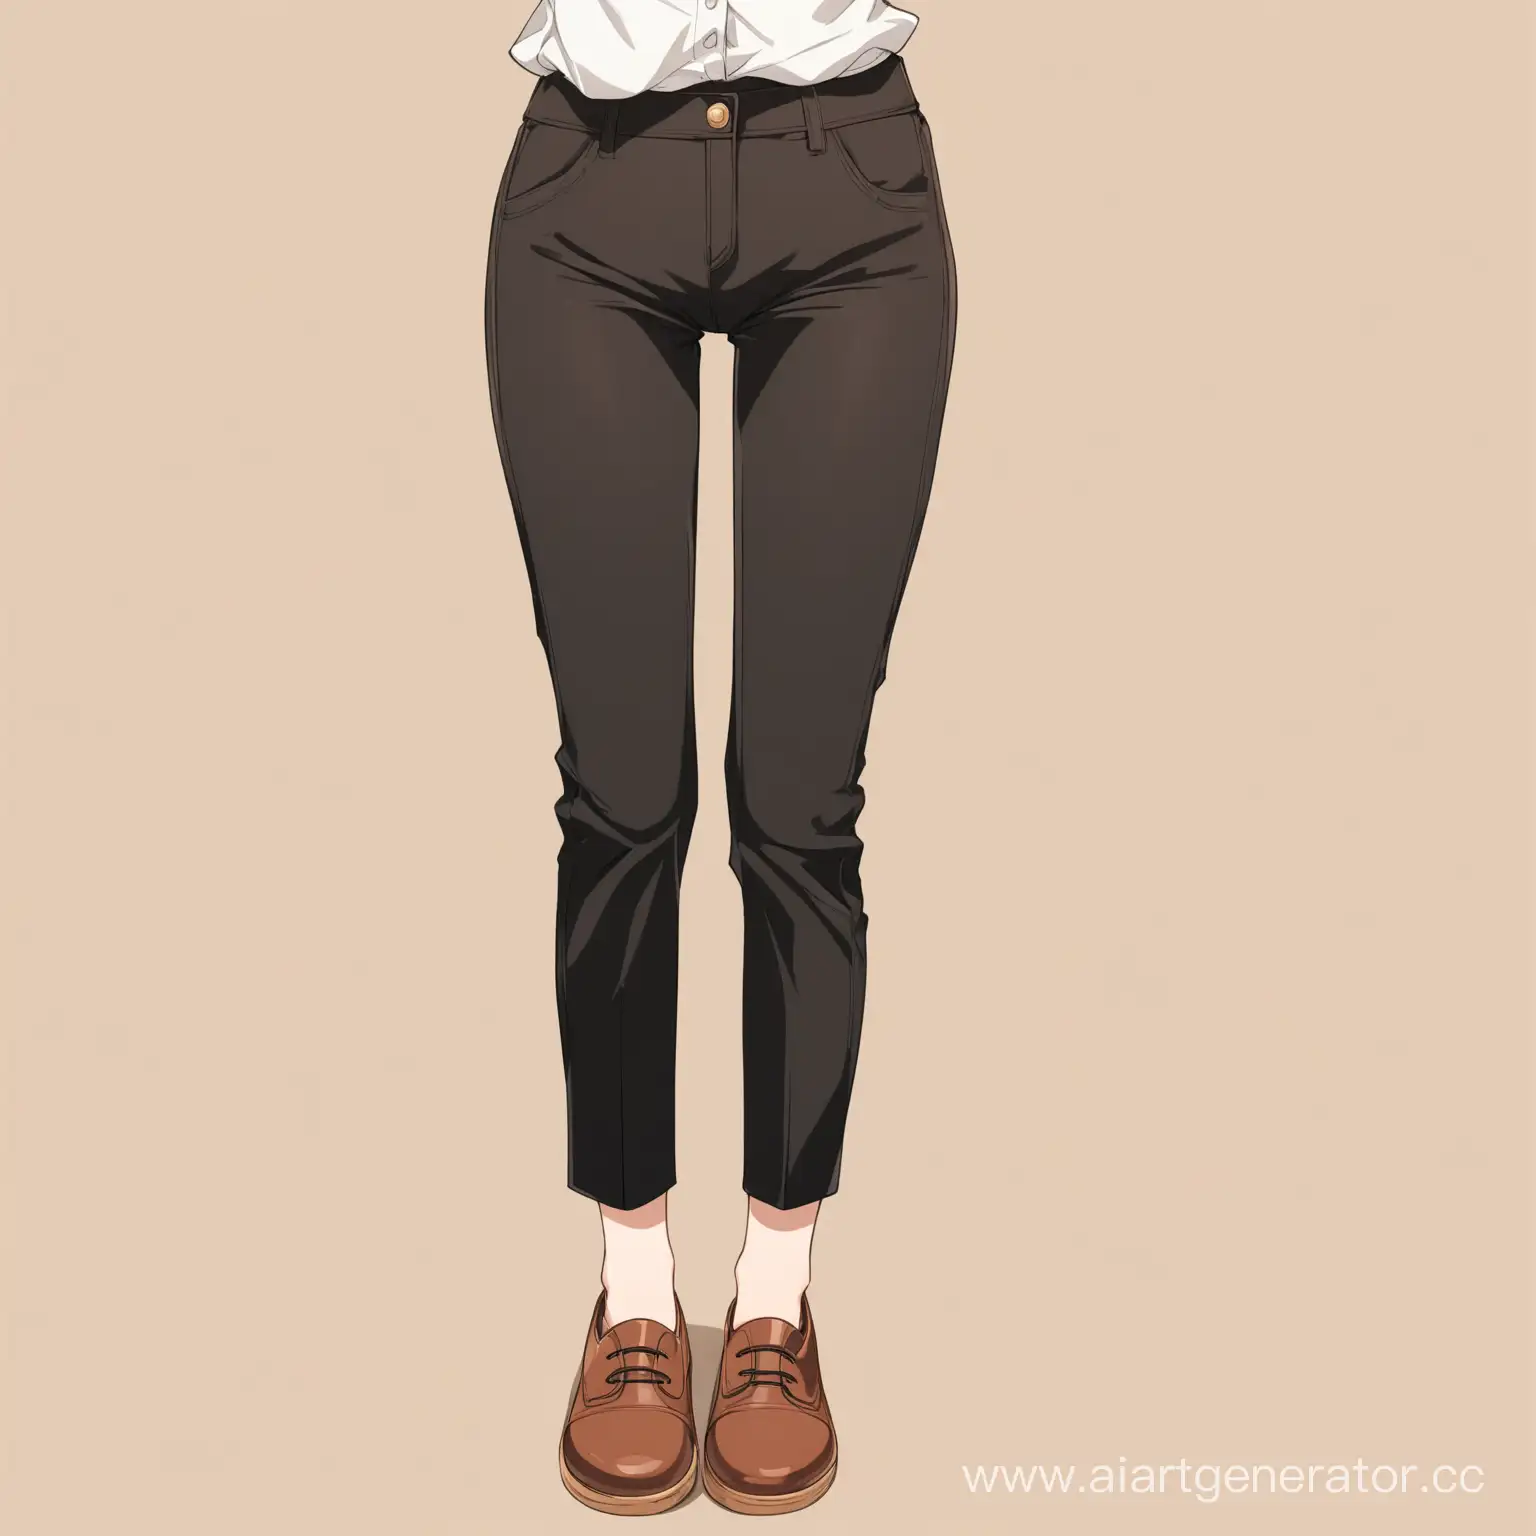 AnimeInspired-MakimaStyle-Female-Legs-in-Black-Pants-with-Chestnut-Shoes